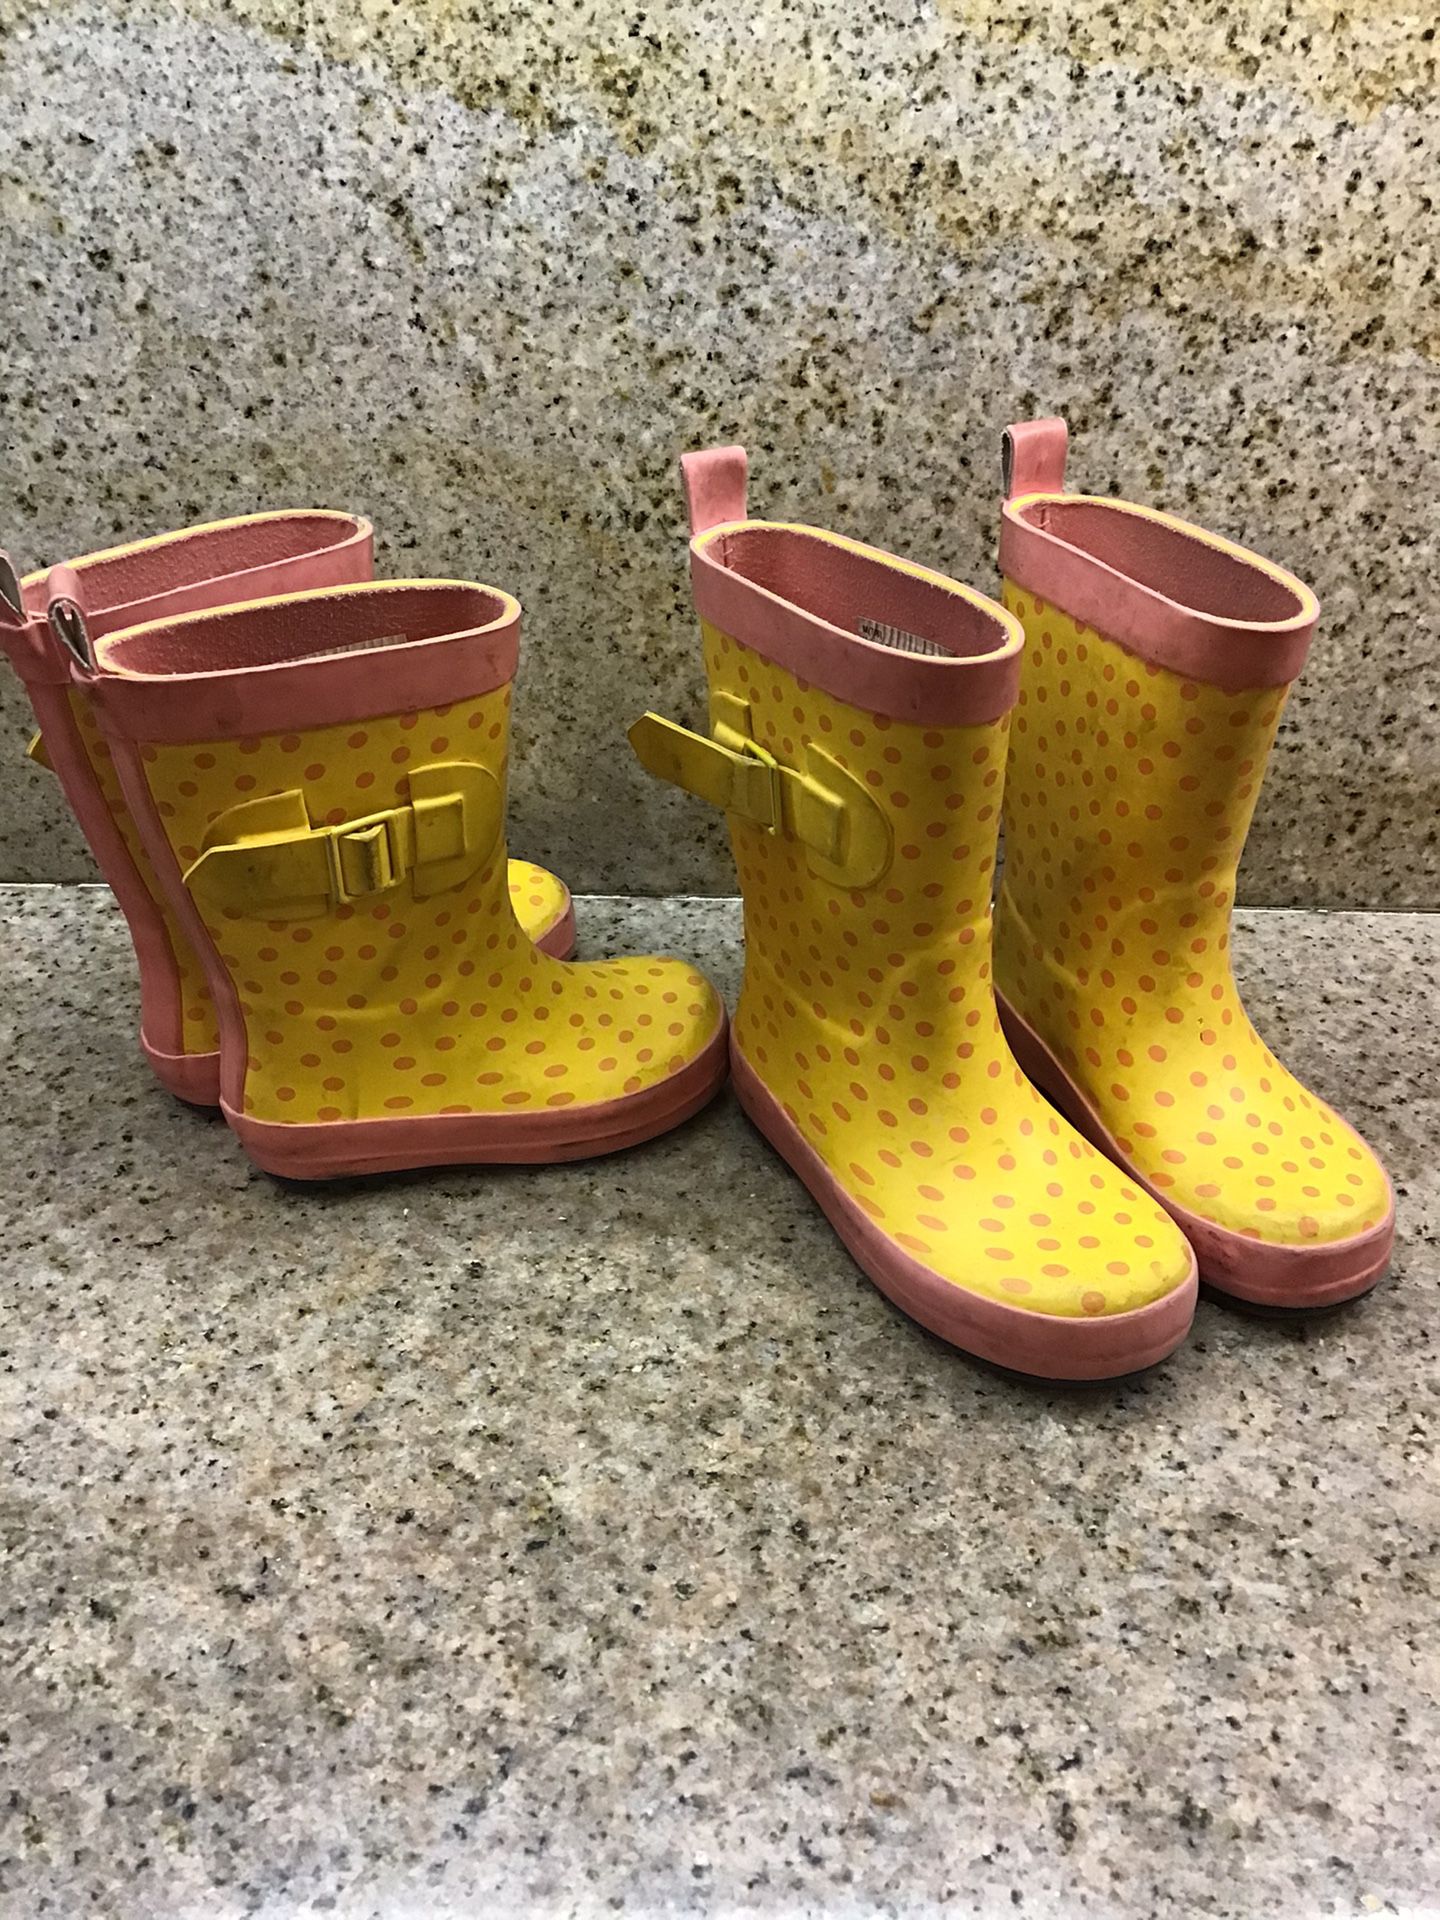 Used. -toddler Girls. Rain boots Size. 5/6.  7/8c